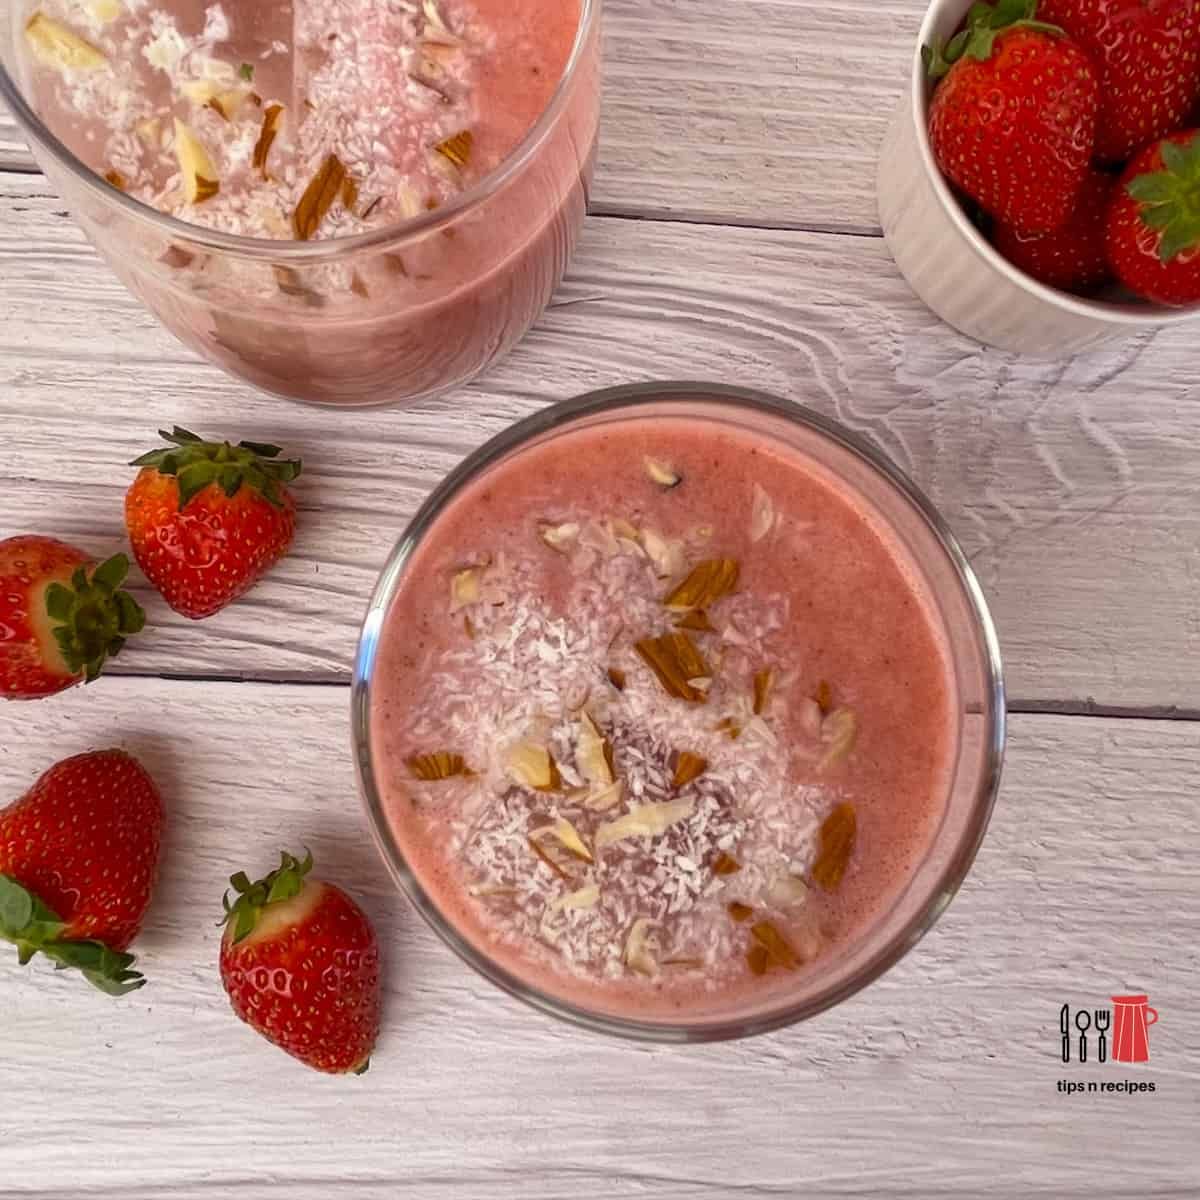 Low FODMAP Strawberry Smoothie | tips n recipes